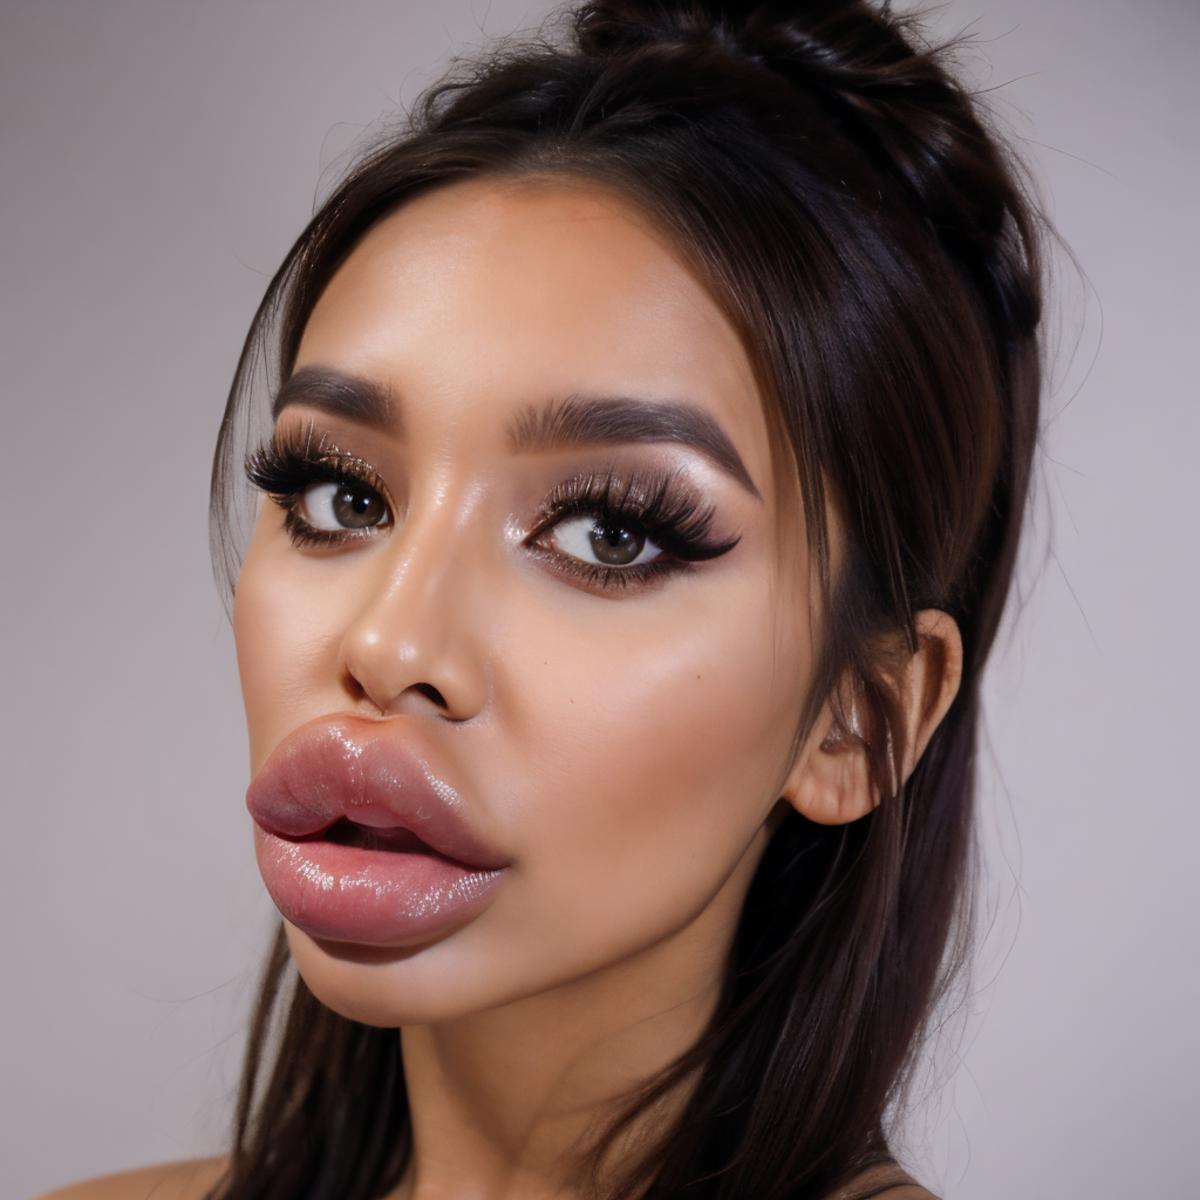 A woman with large lips wearing a bun in her hair.